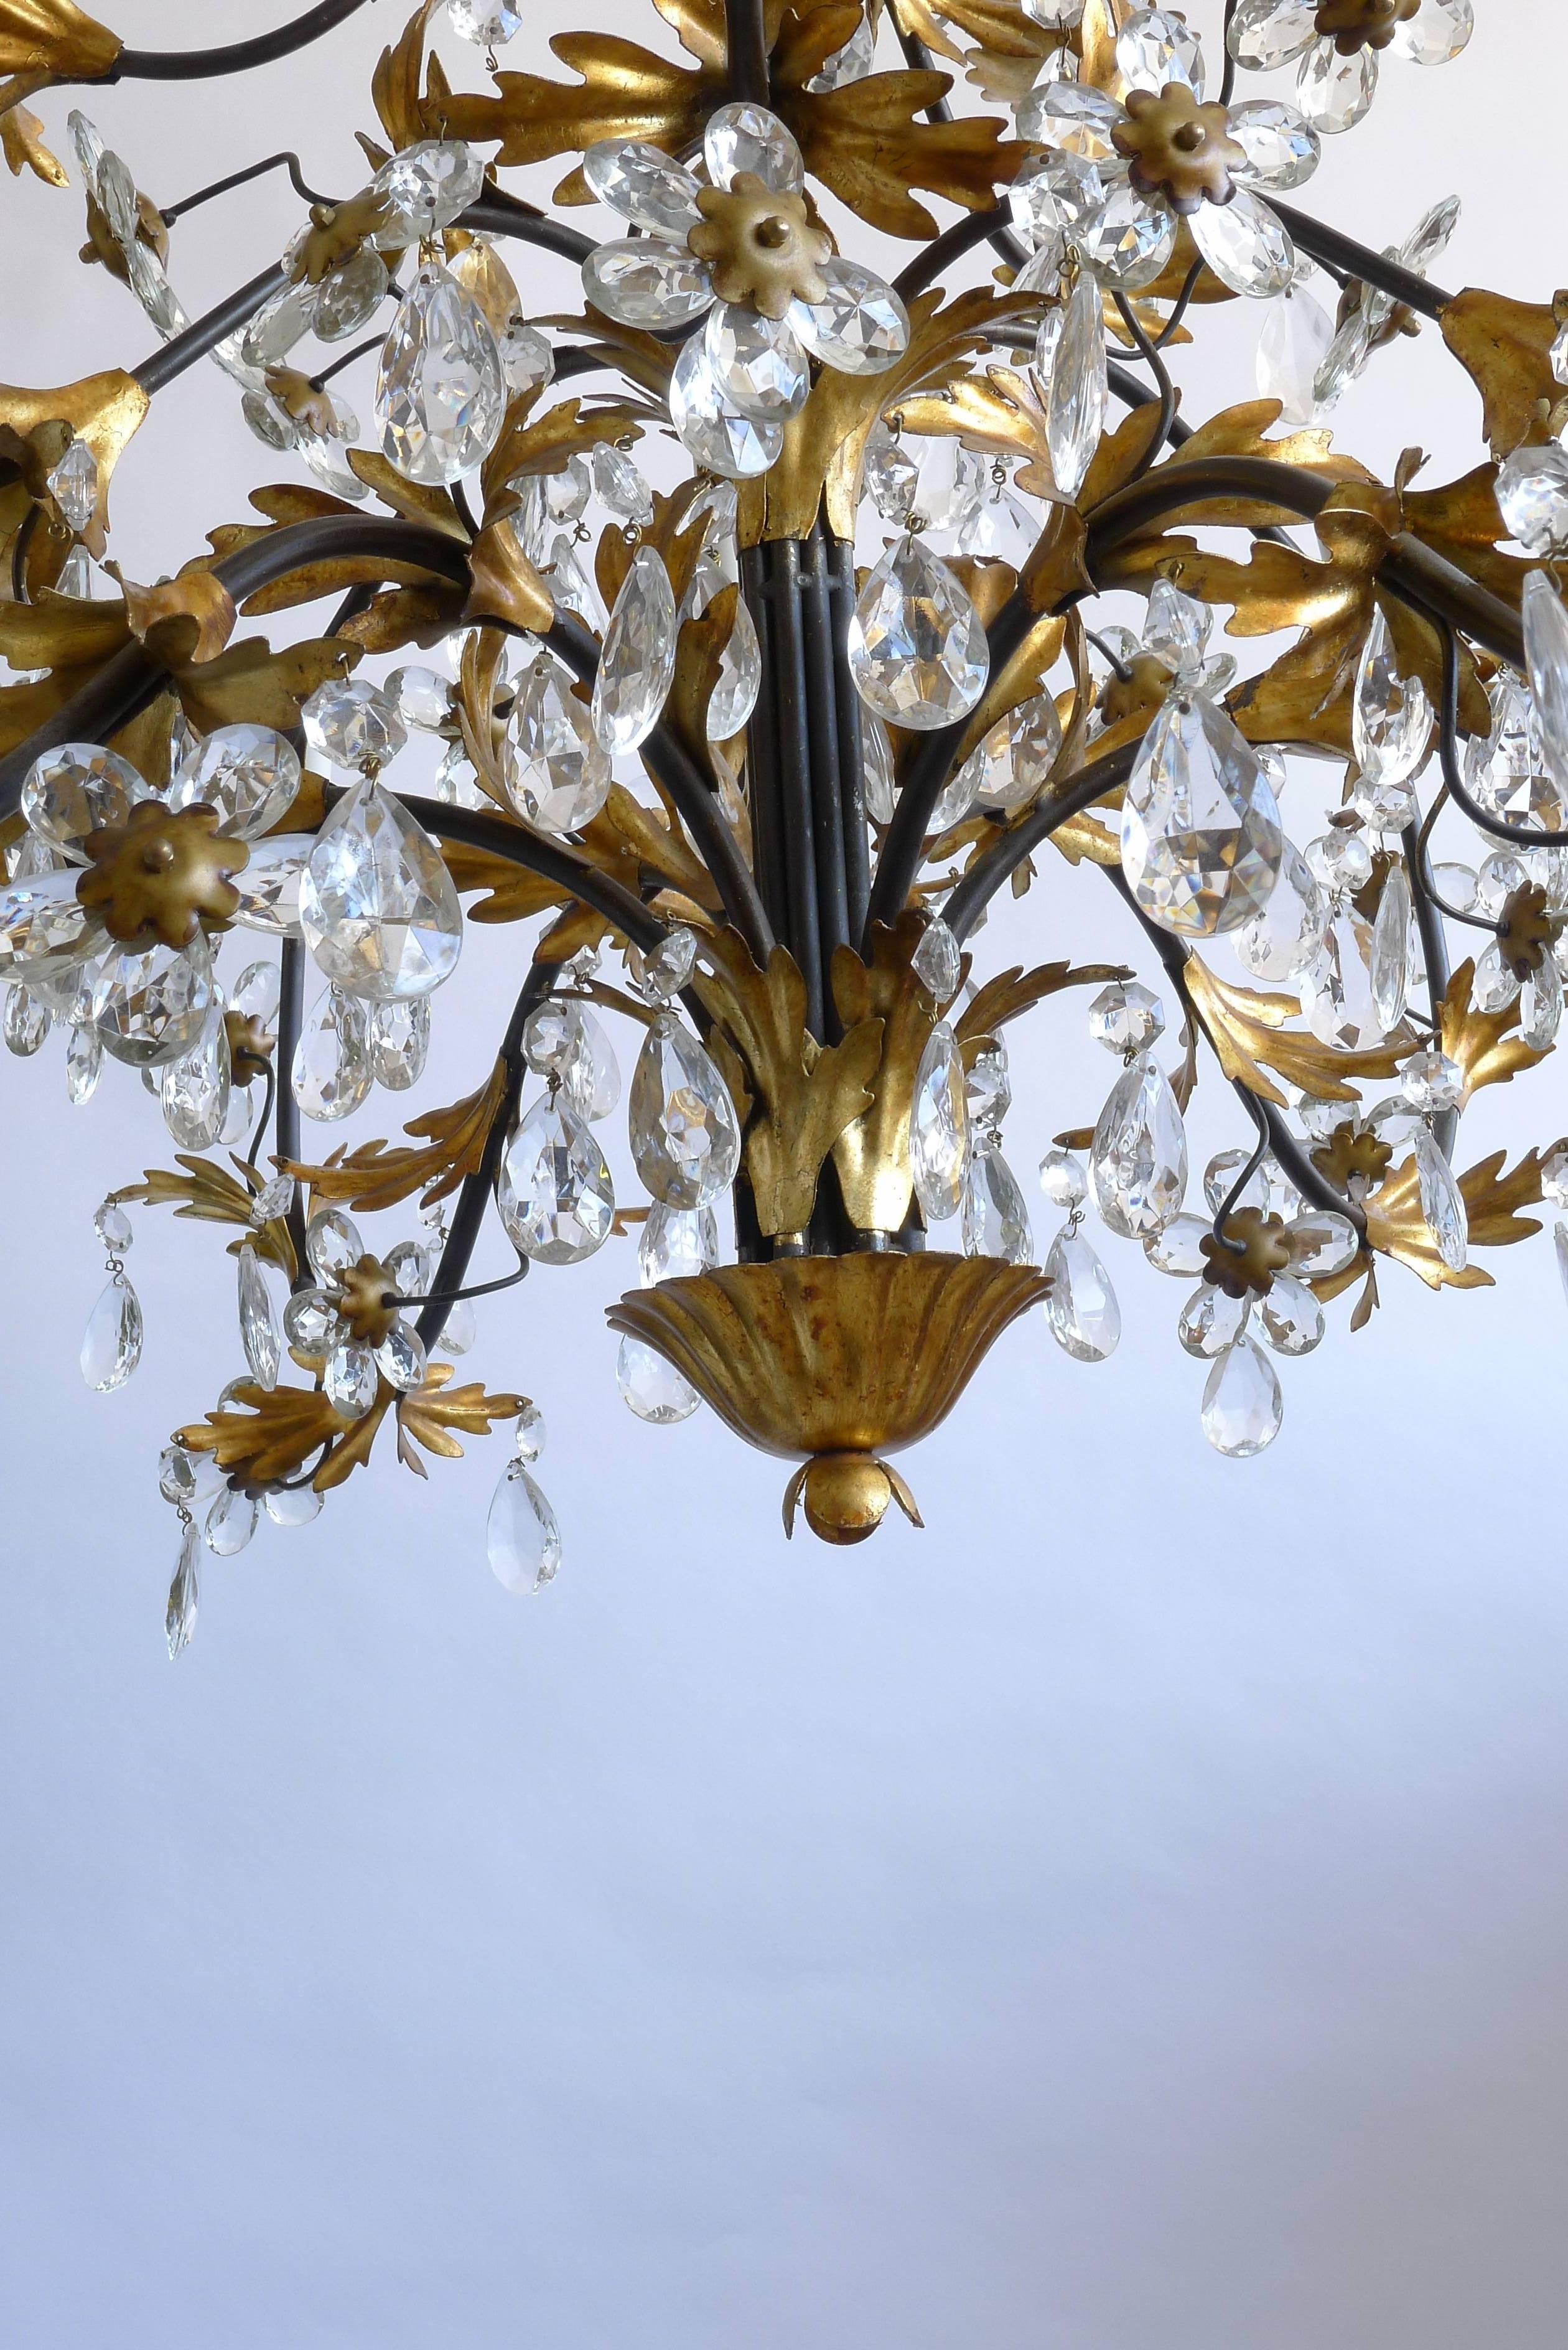 Wrought iron painted and gilt chandelier with fifteen arms. Crystal pentalogs and floral details. From the Hollywood Regency period. Incandescent lamping.

Architect, Sandy Littman of Duesenberg LTD.  and The American Glass Light Company have been